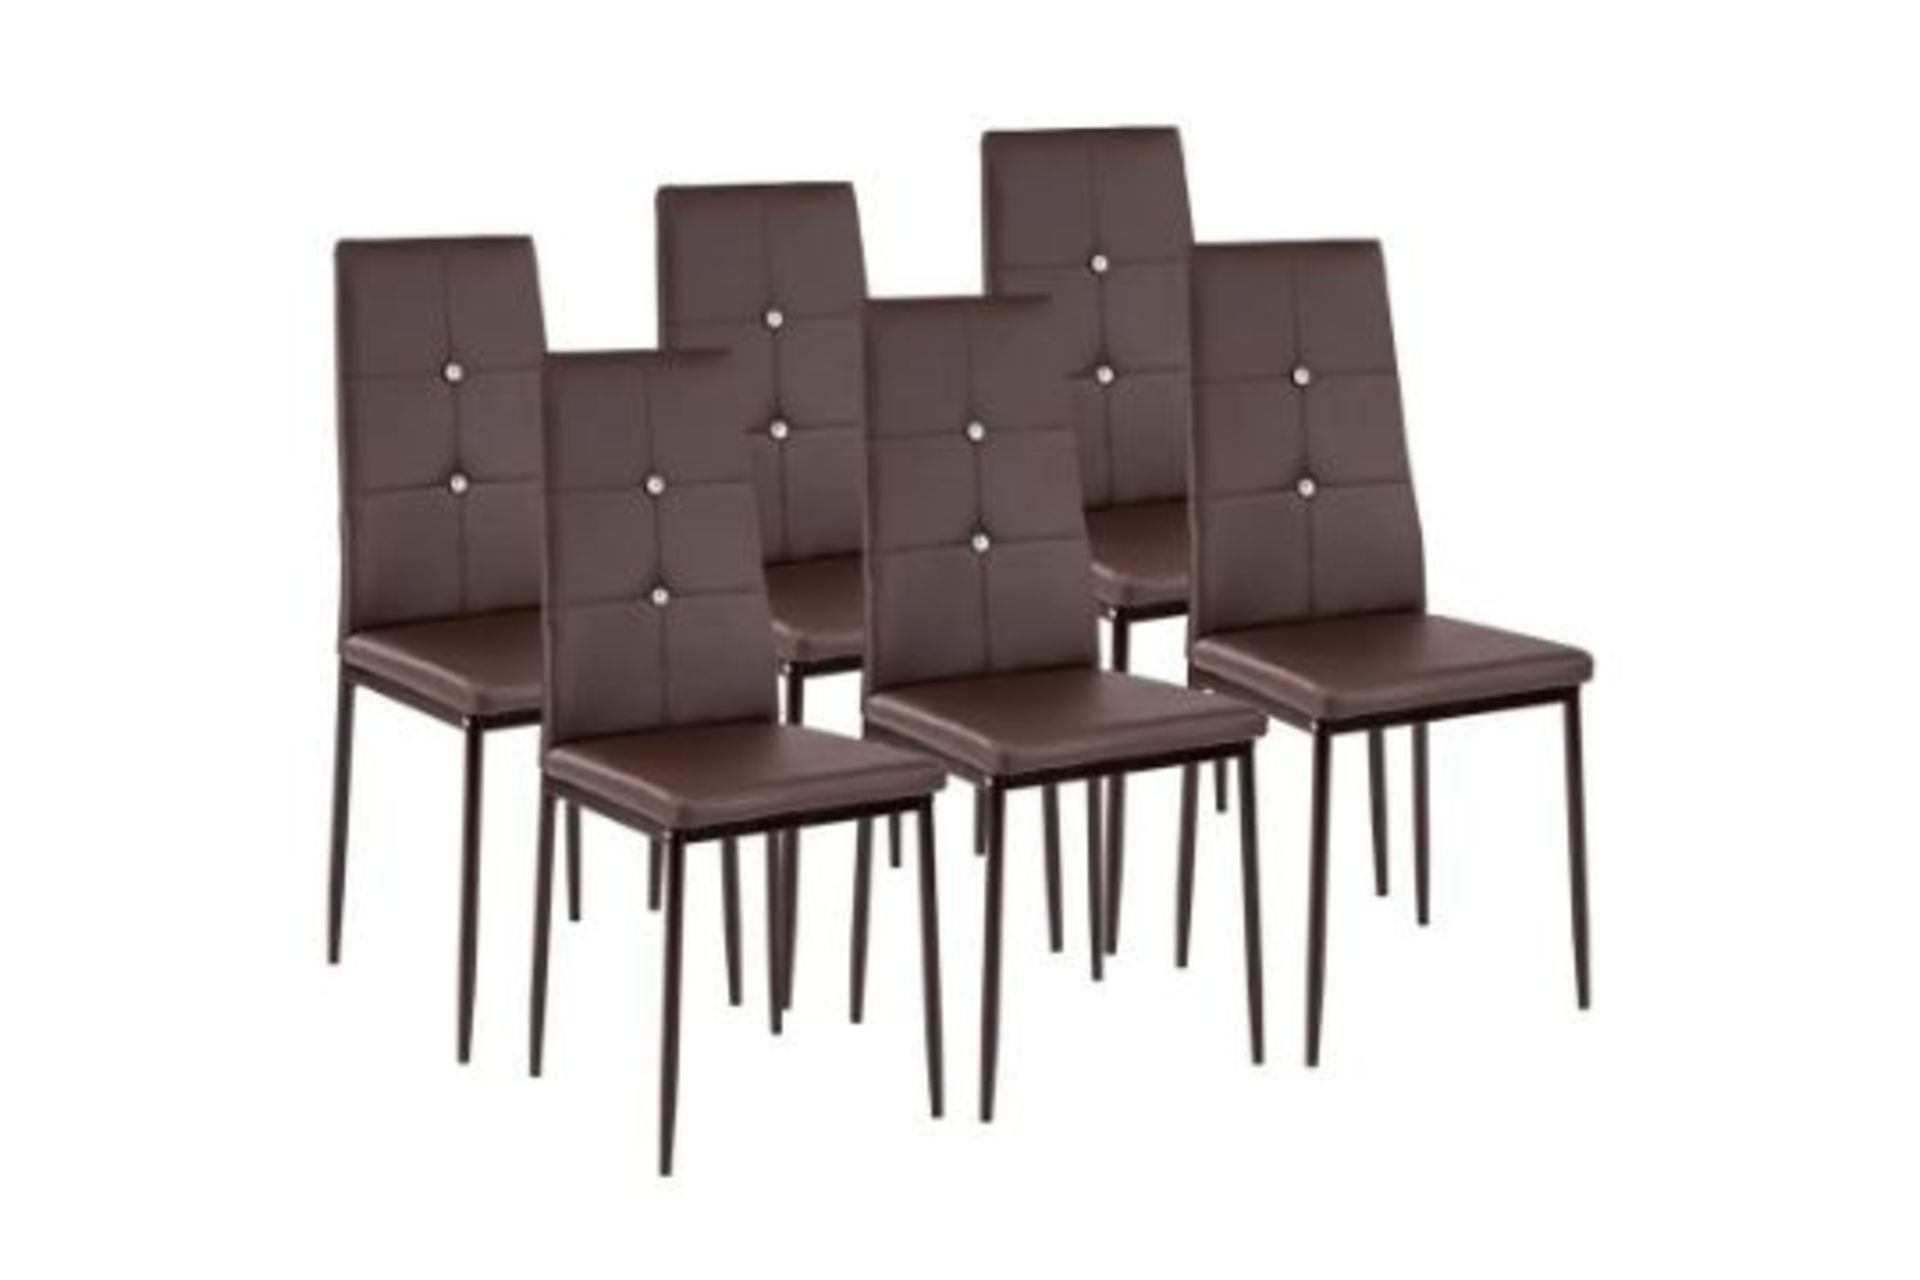 Dining chairs with rhinestones | Set of 6 cappuccino. - R13A.10. RRP £259.00. Make a stylish